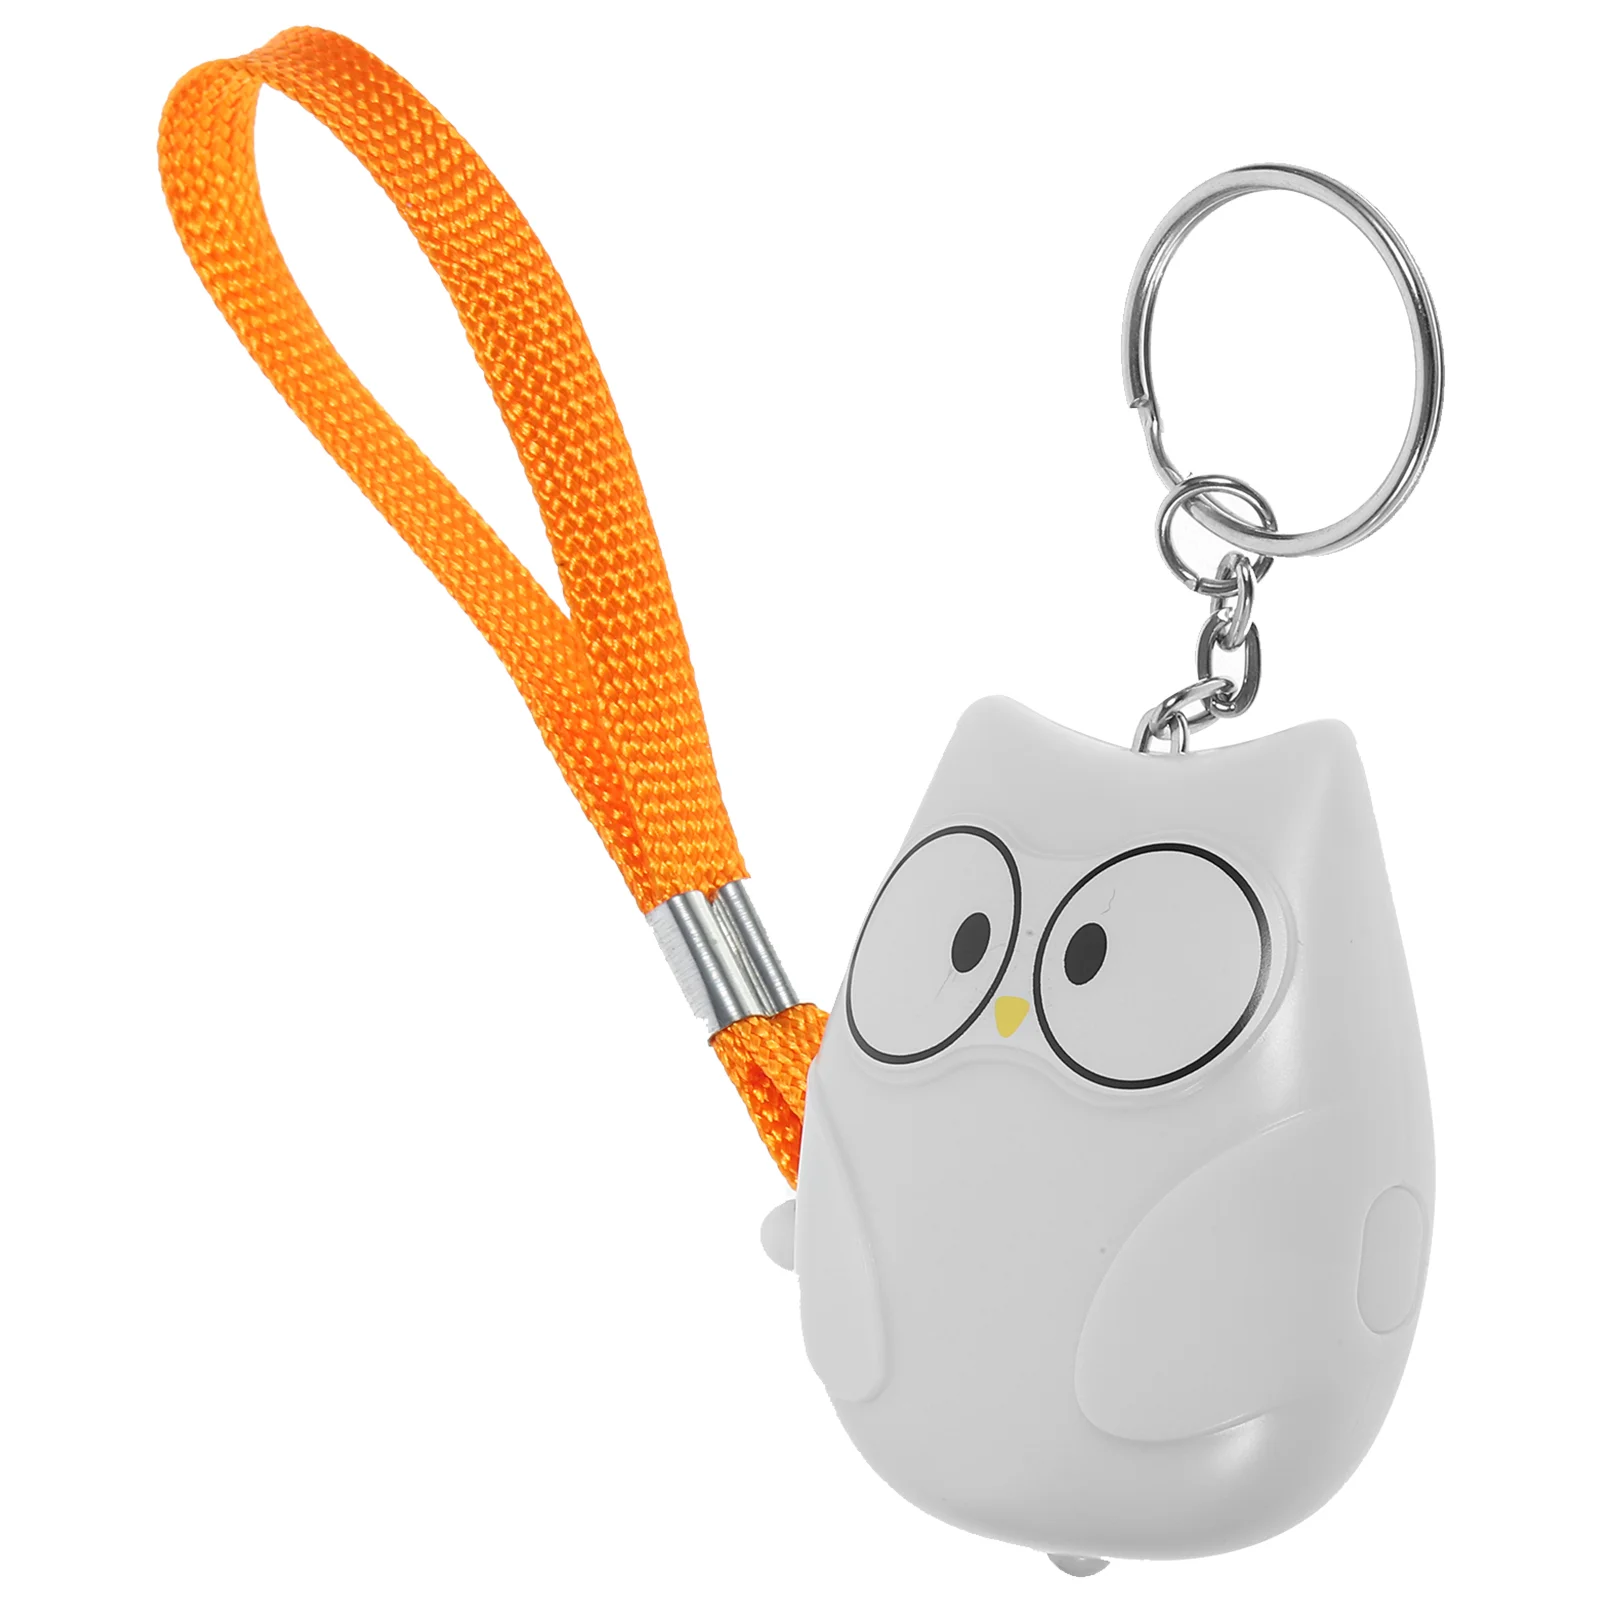 

Personal Alarm Alarms for Women Key Fob Ornament Safety Keychain Electronic Outdoor Miss